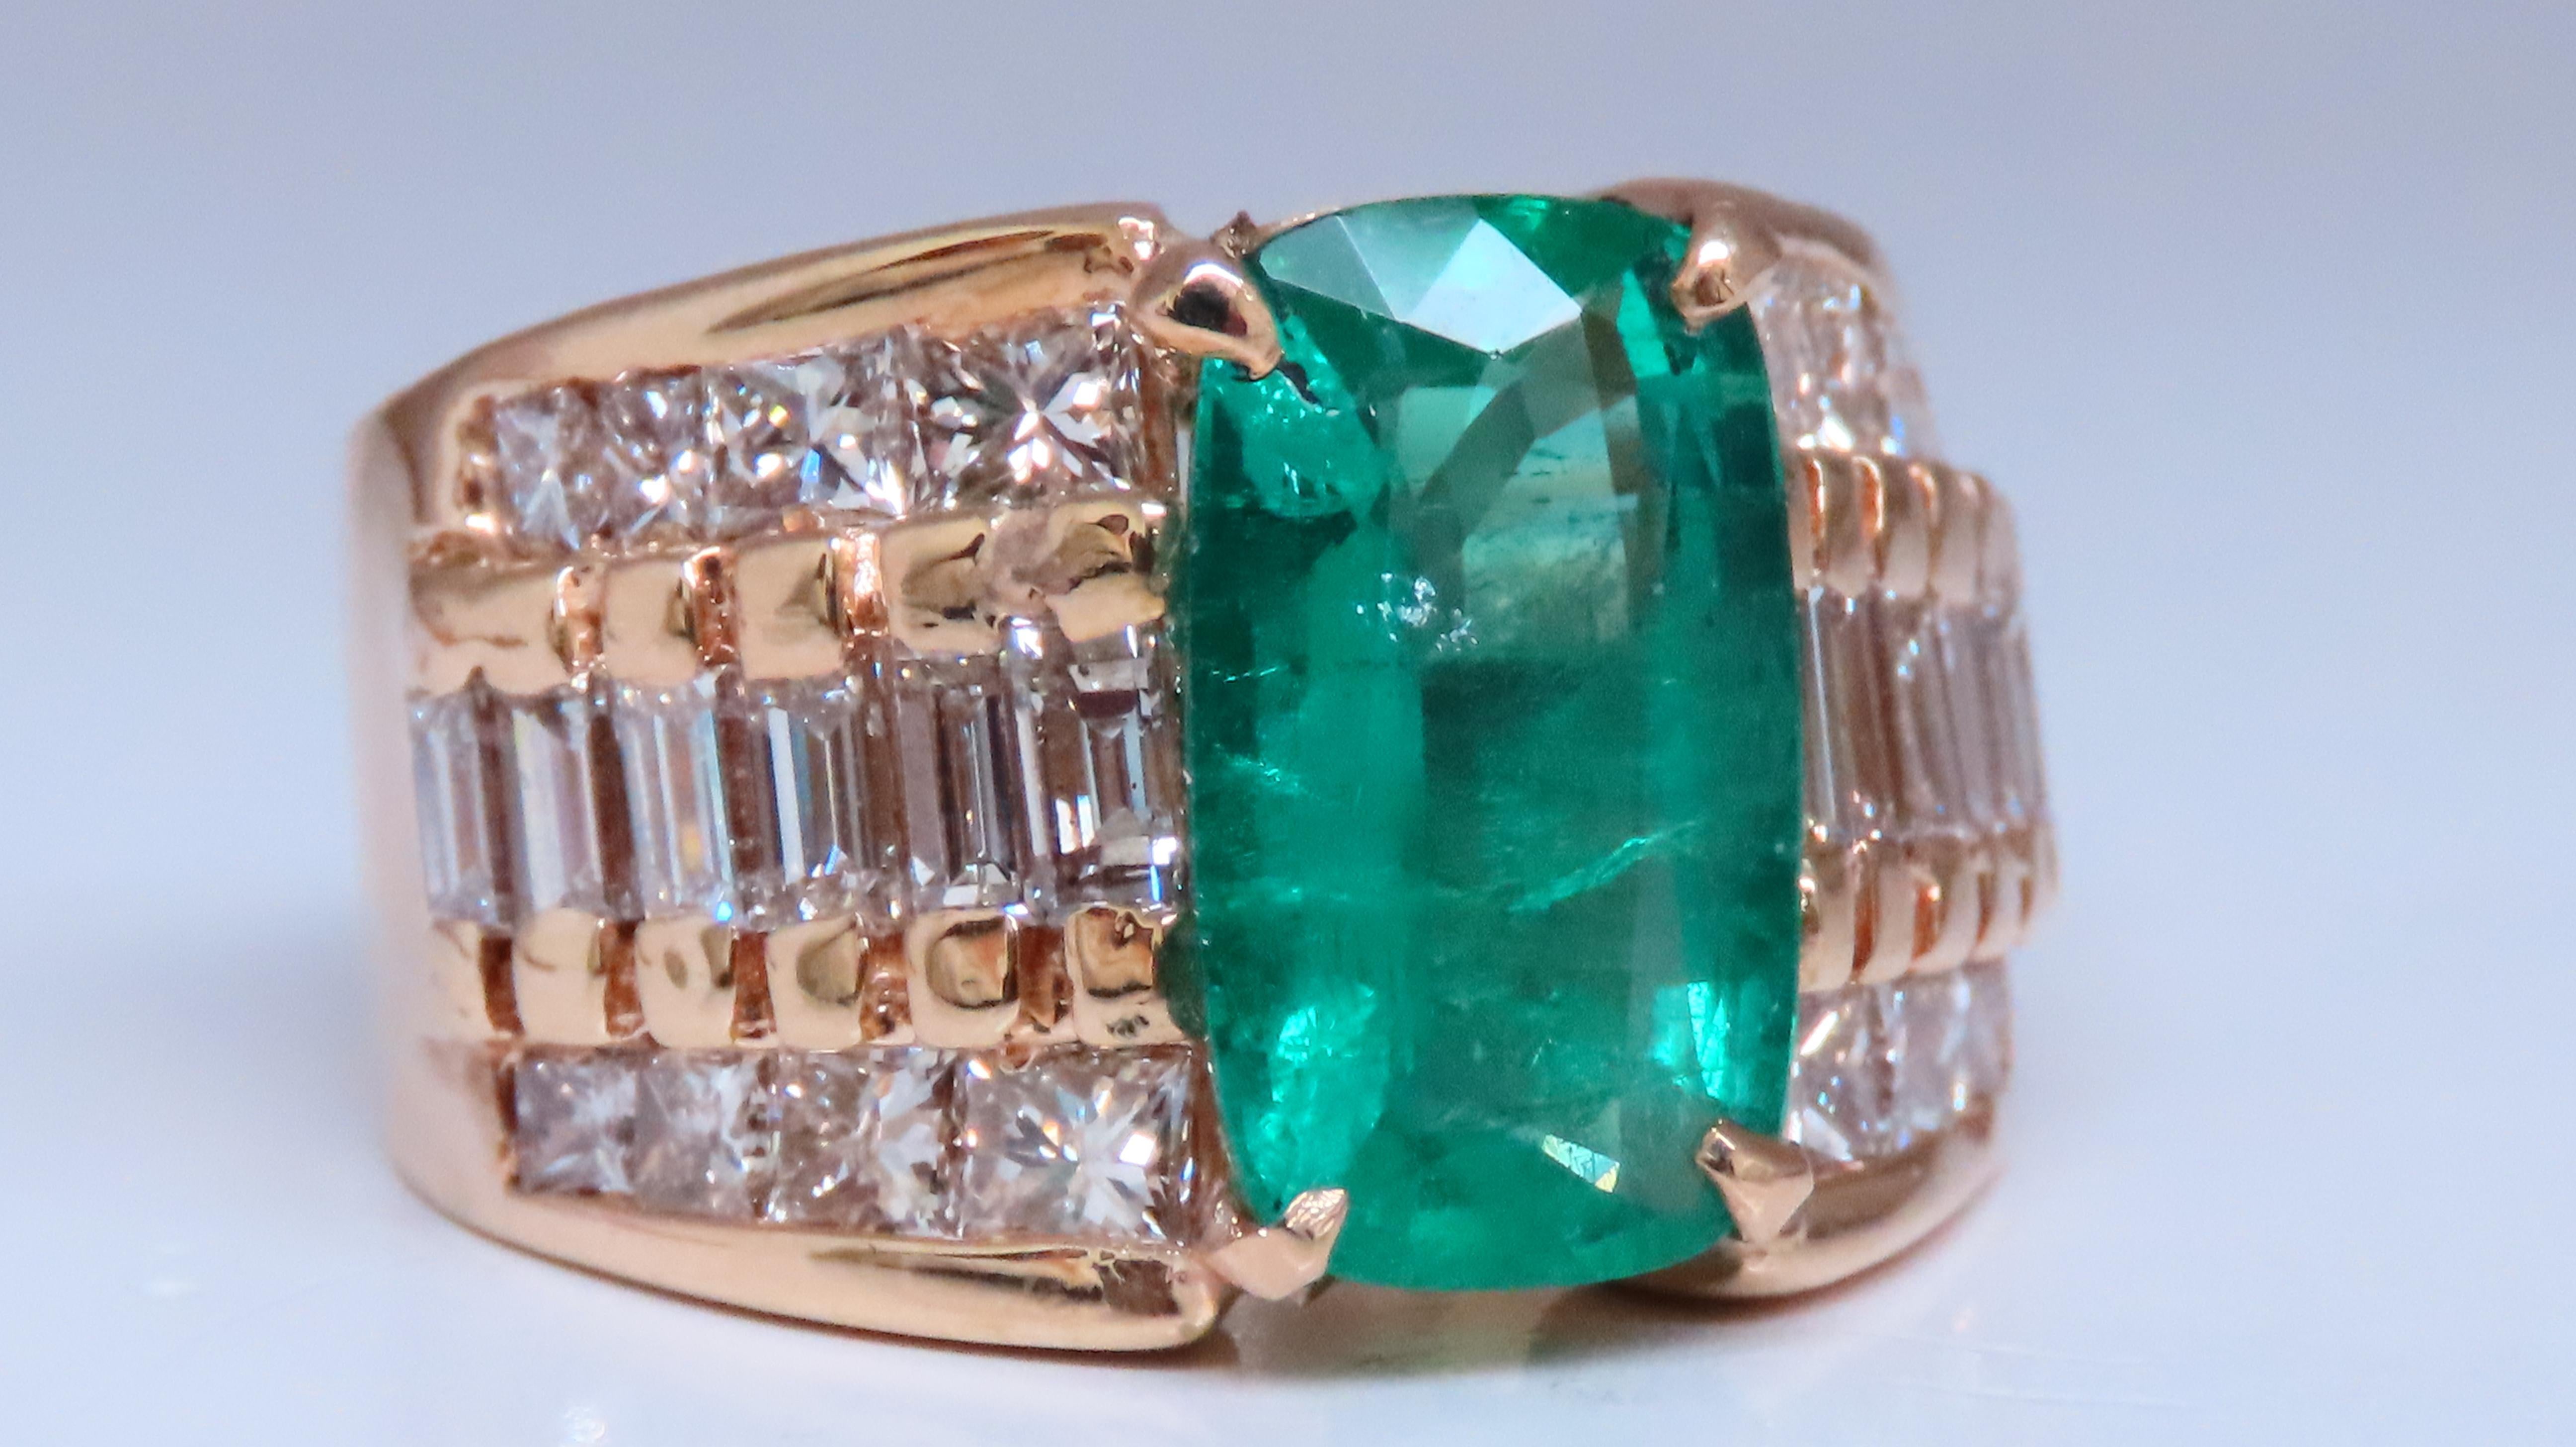 GIA Certified 3.01ct natural emerald ring.
Report 2225531445 to accompany.
Stating 12.70 x 7.50 x 4.47mm 
F2 Clarity Enhancement
2.20ct Baguette and princess cut diamonds.
H-color Vs-2 clarity.
14kt. yellow gold. 8.9 grams
Ring Size: 7
Depth of